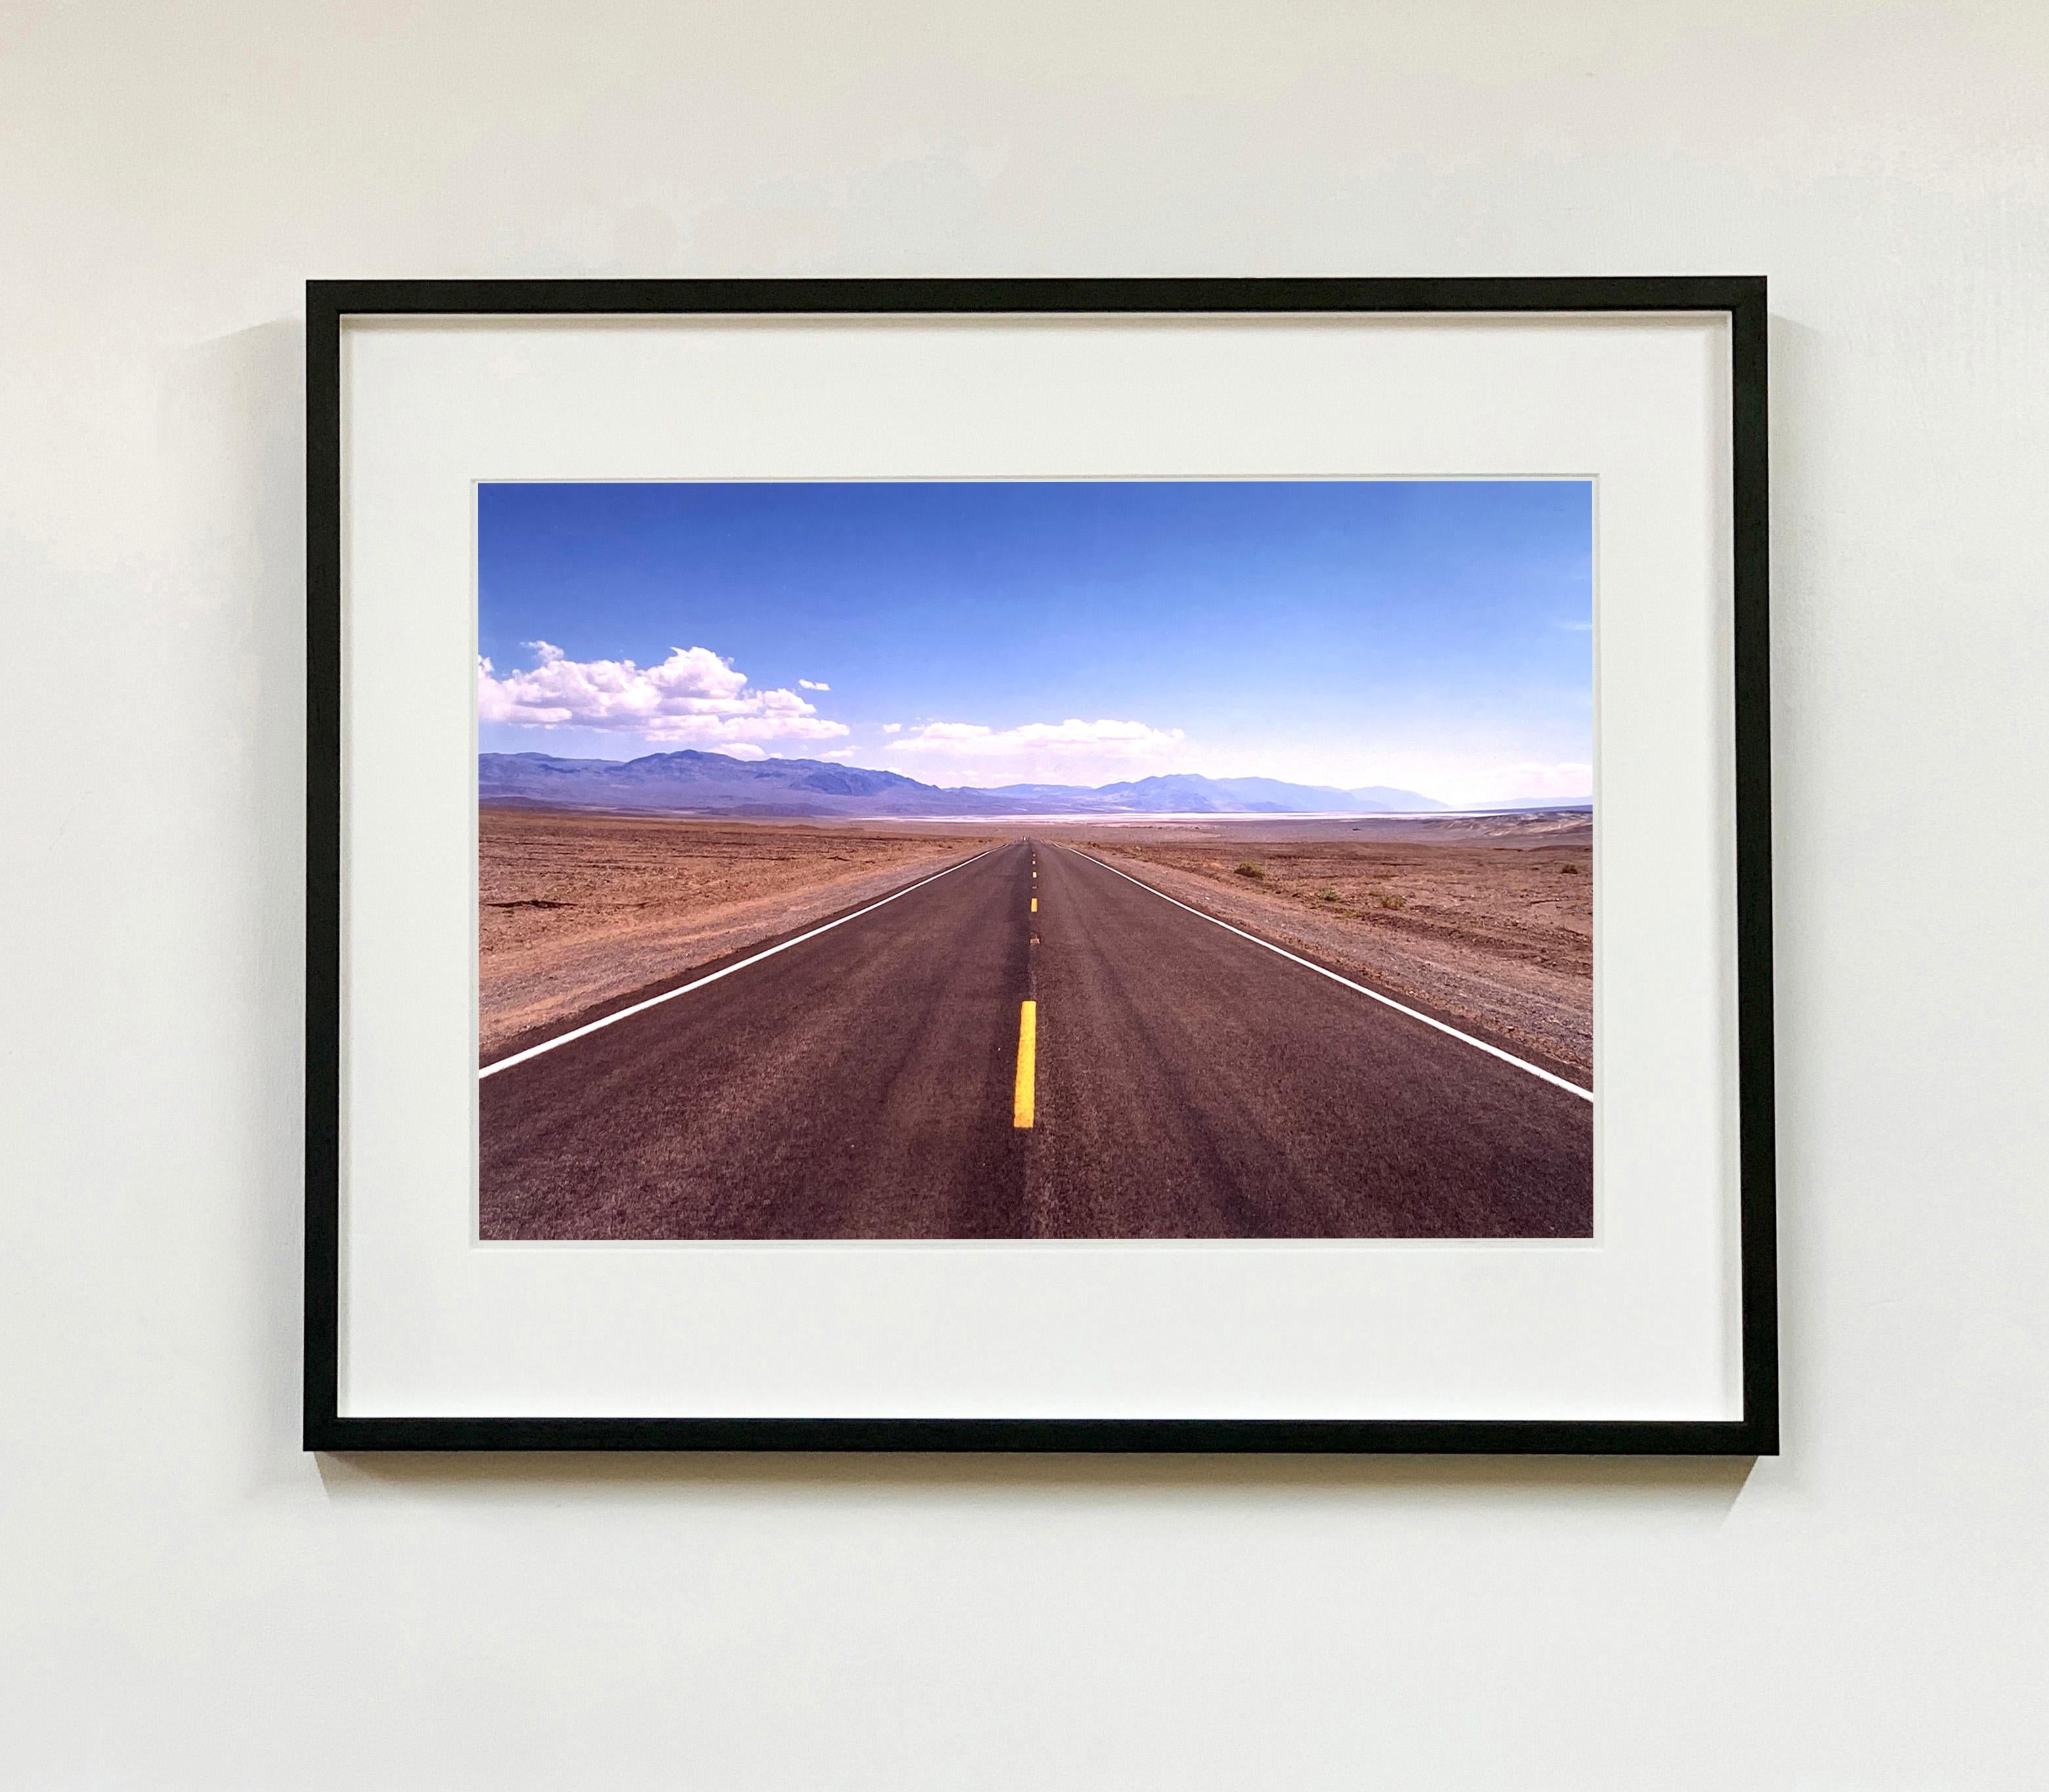 The Road to Death Valley, Mojave Desert, California - Landscape Color Photo - Photograph by Richard Heeps